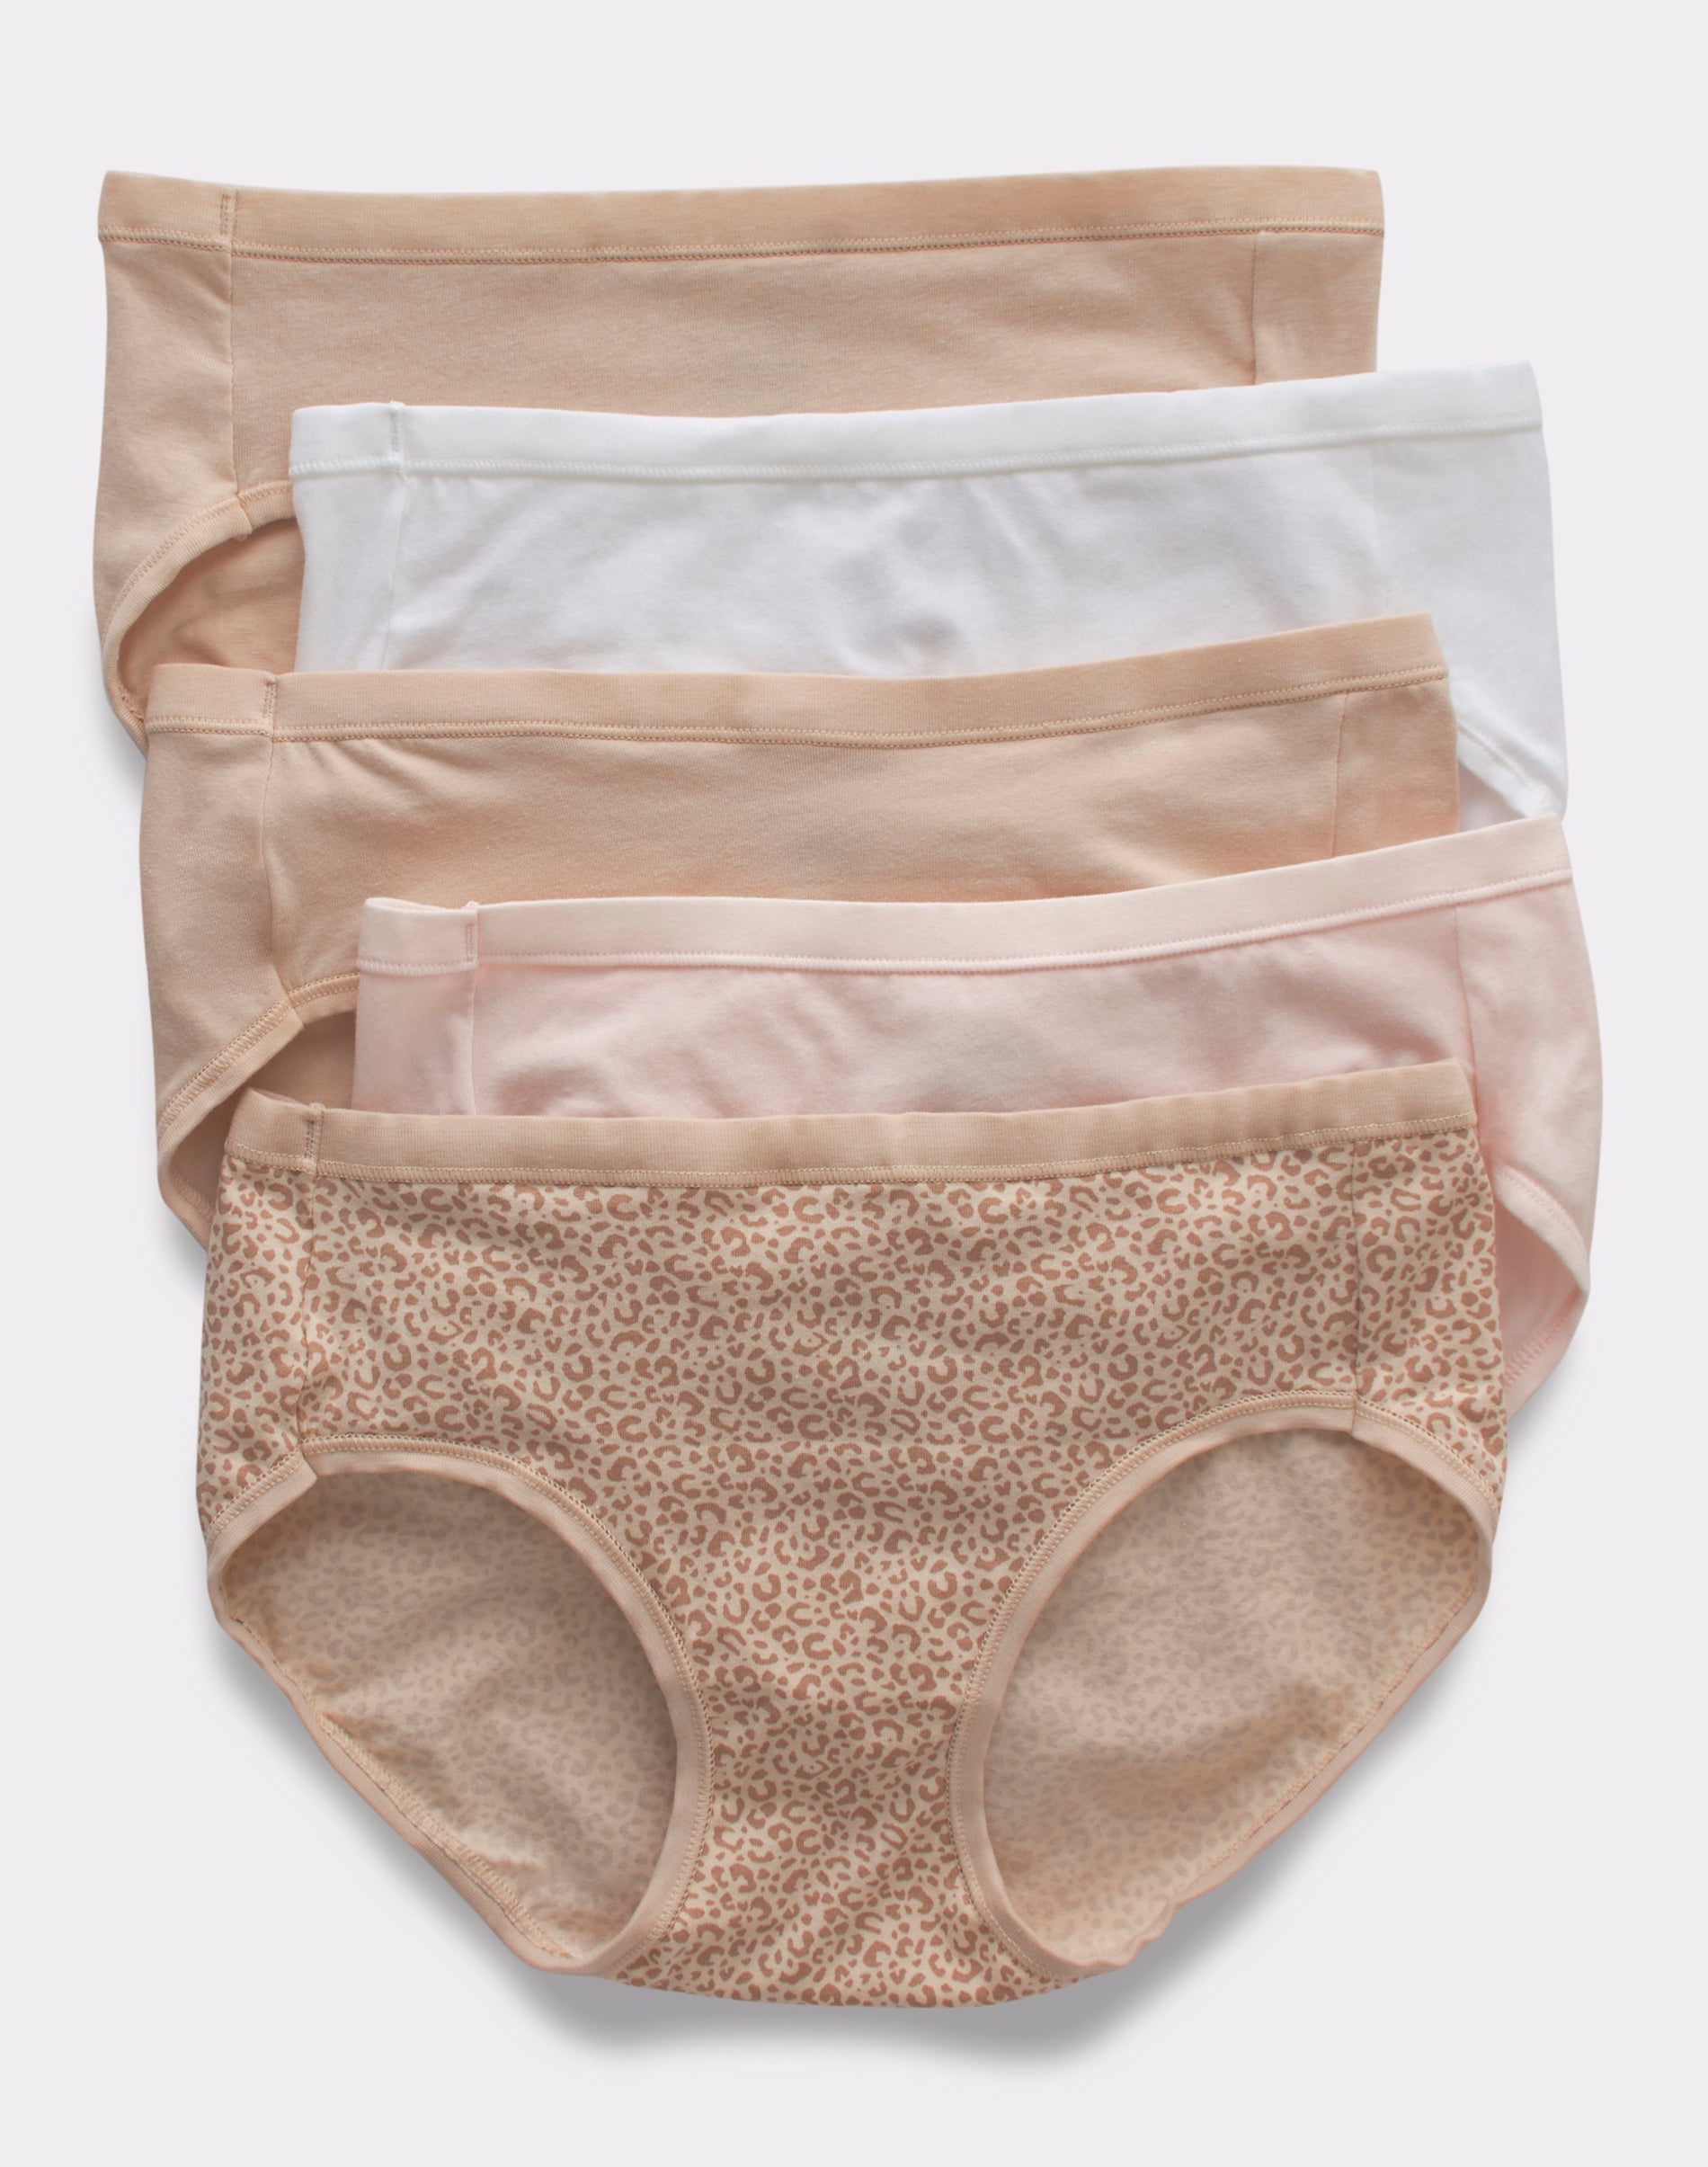 Hanes Ultimate ComfortSoft Women's Hipster Underwear, 5-Pack Soft Taupe  Heather/Light Buff/Classic Leopard Print/White/Soft 5 